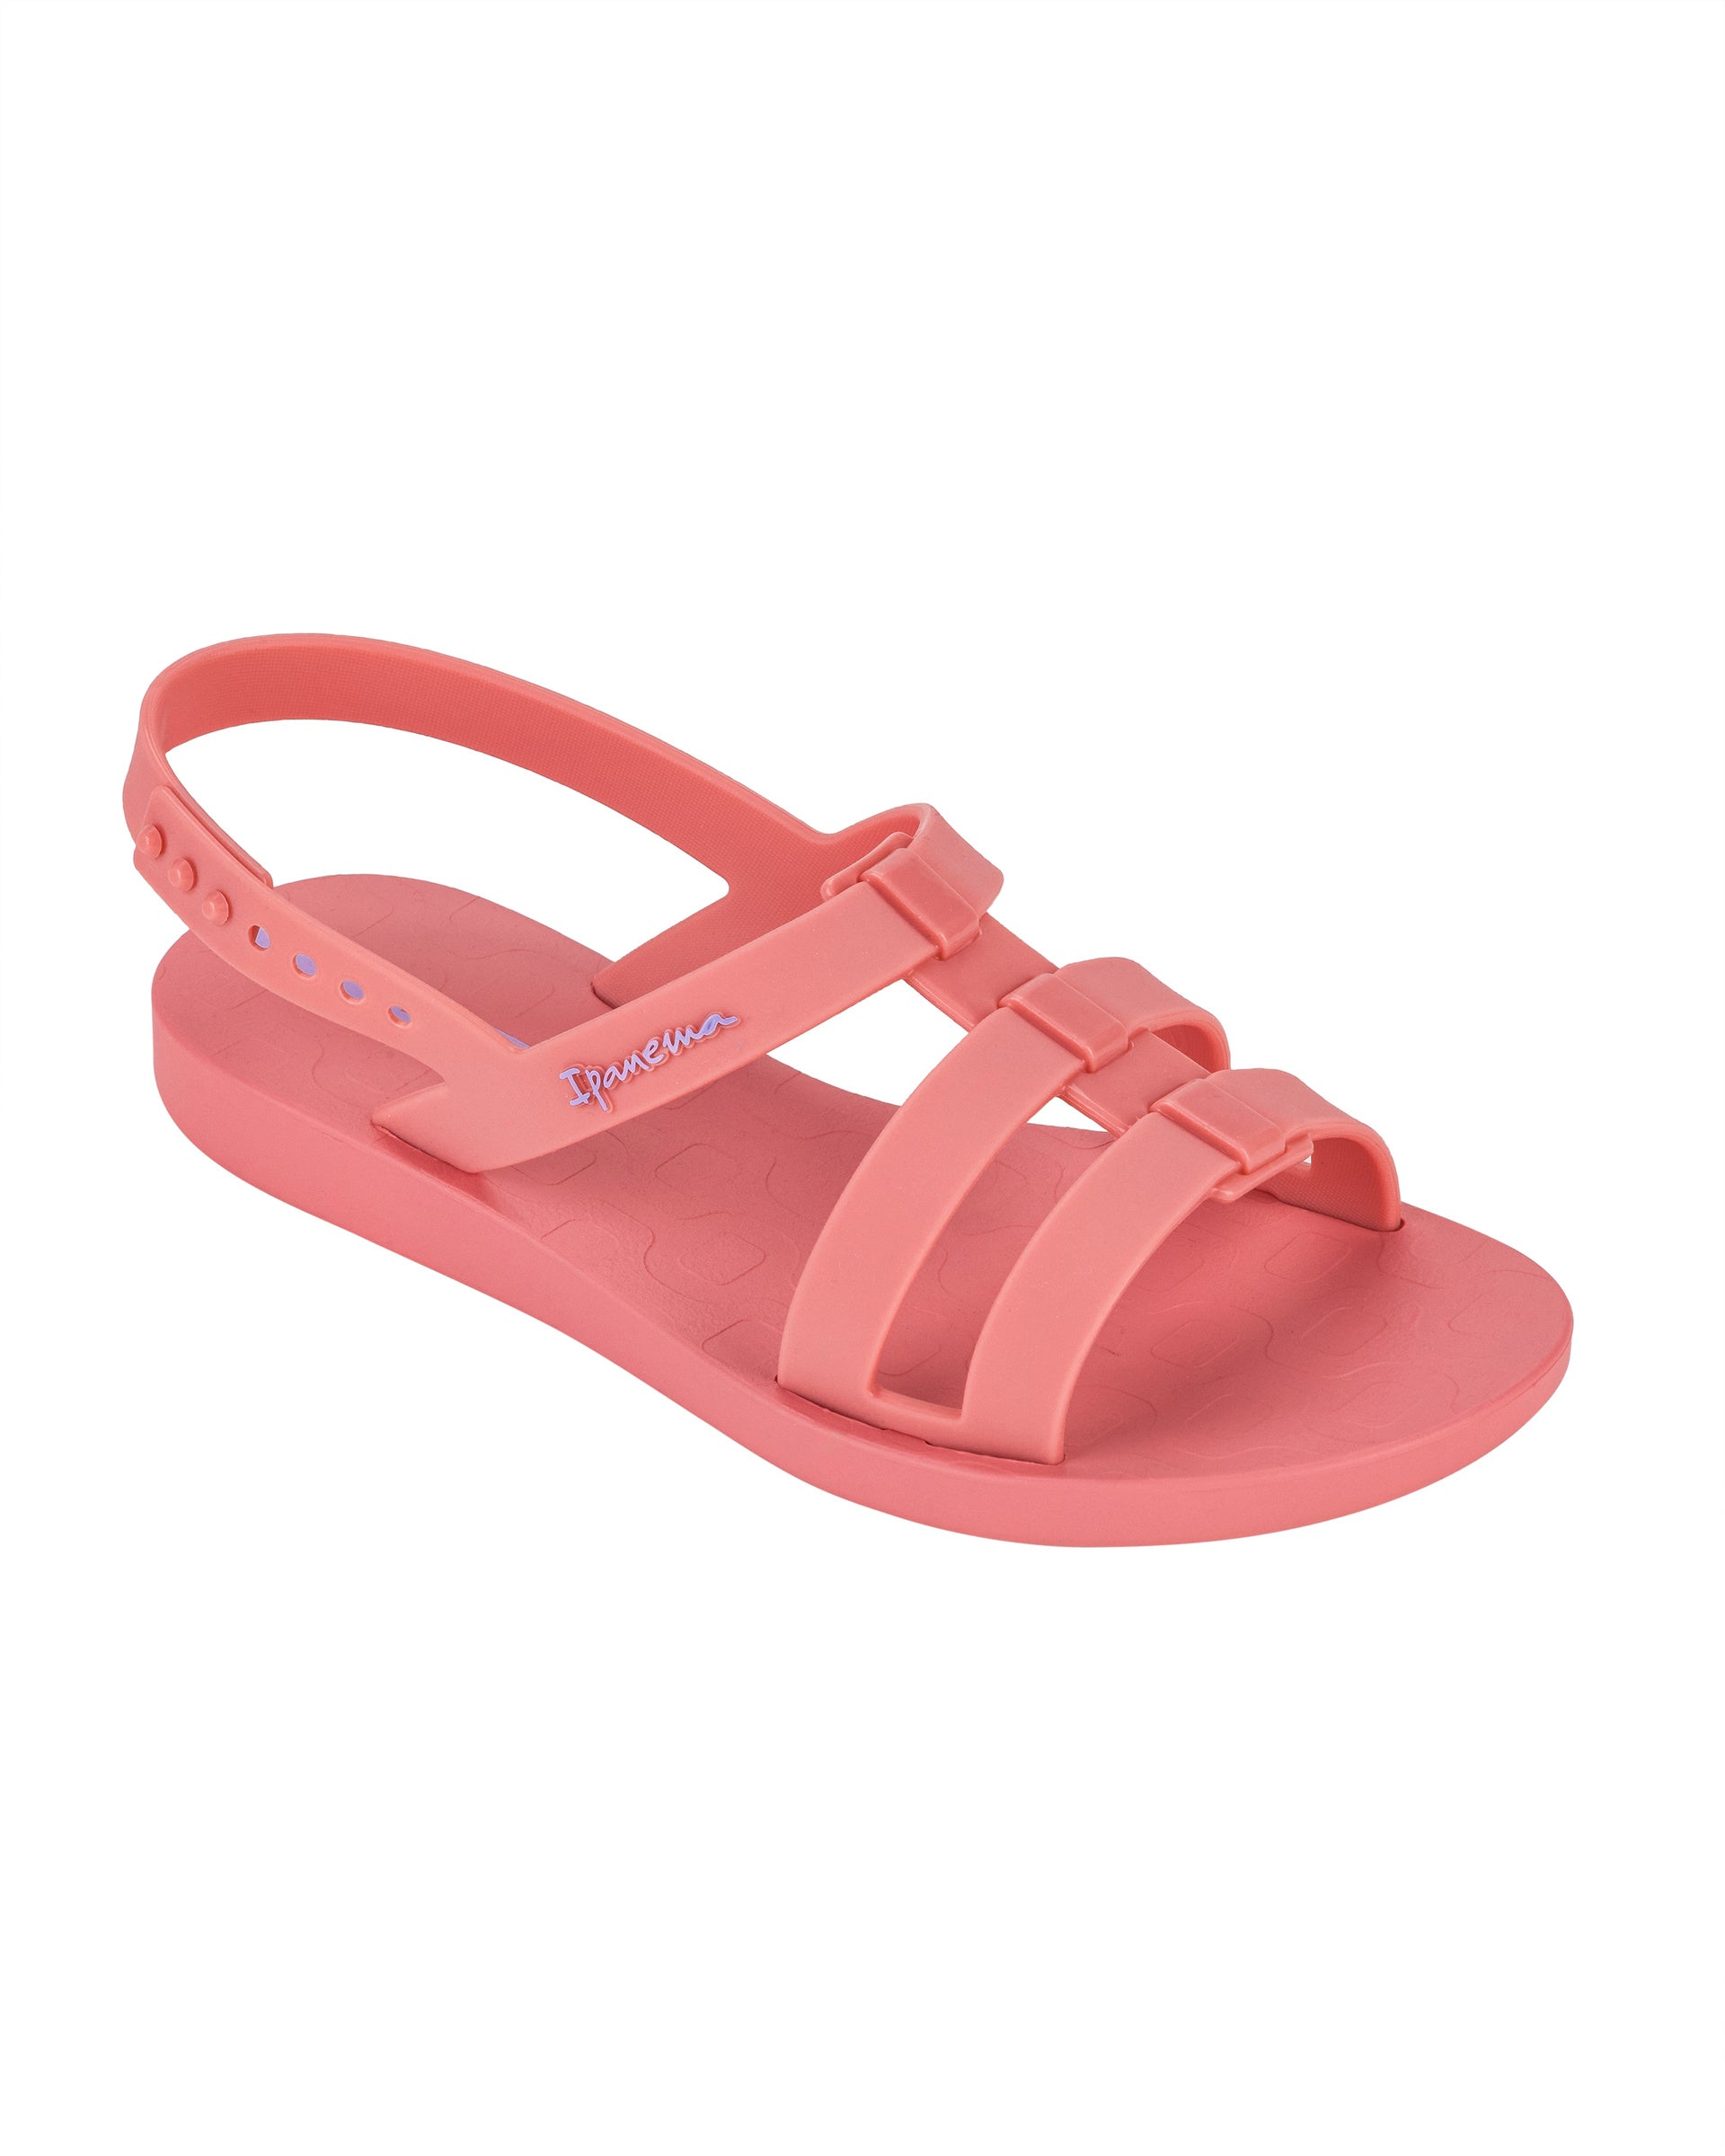 Angled view of a pink Ipanema Class Go women's sandal.